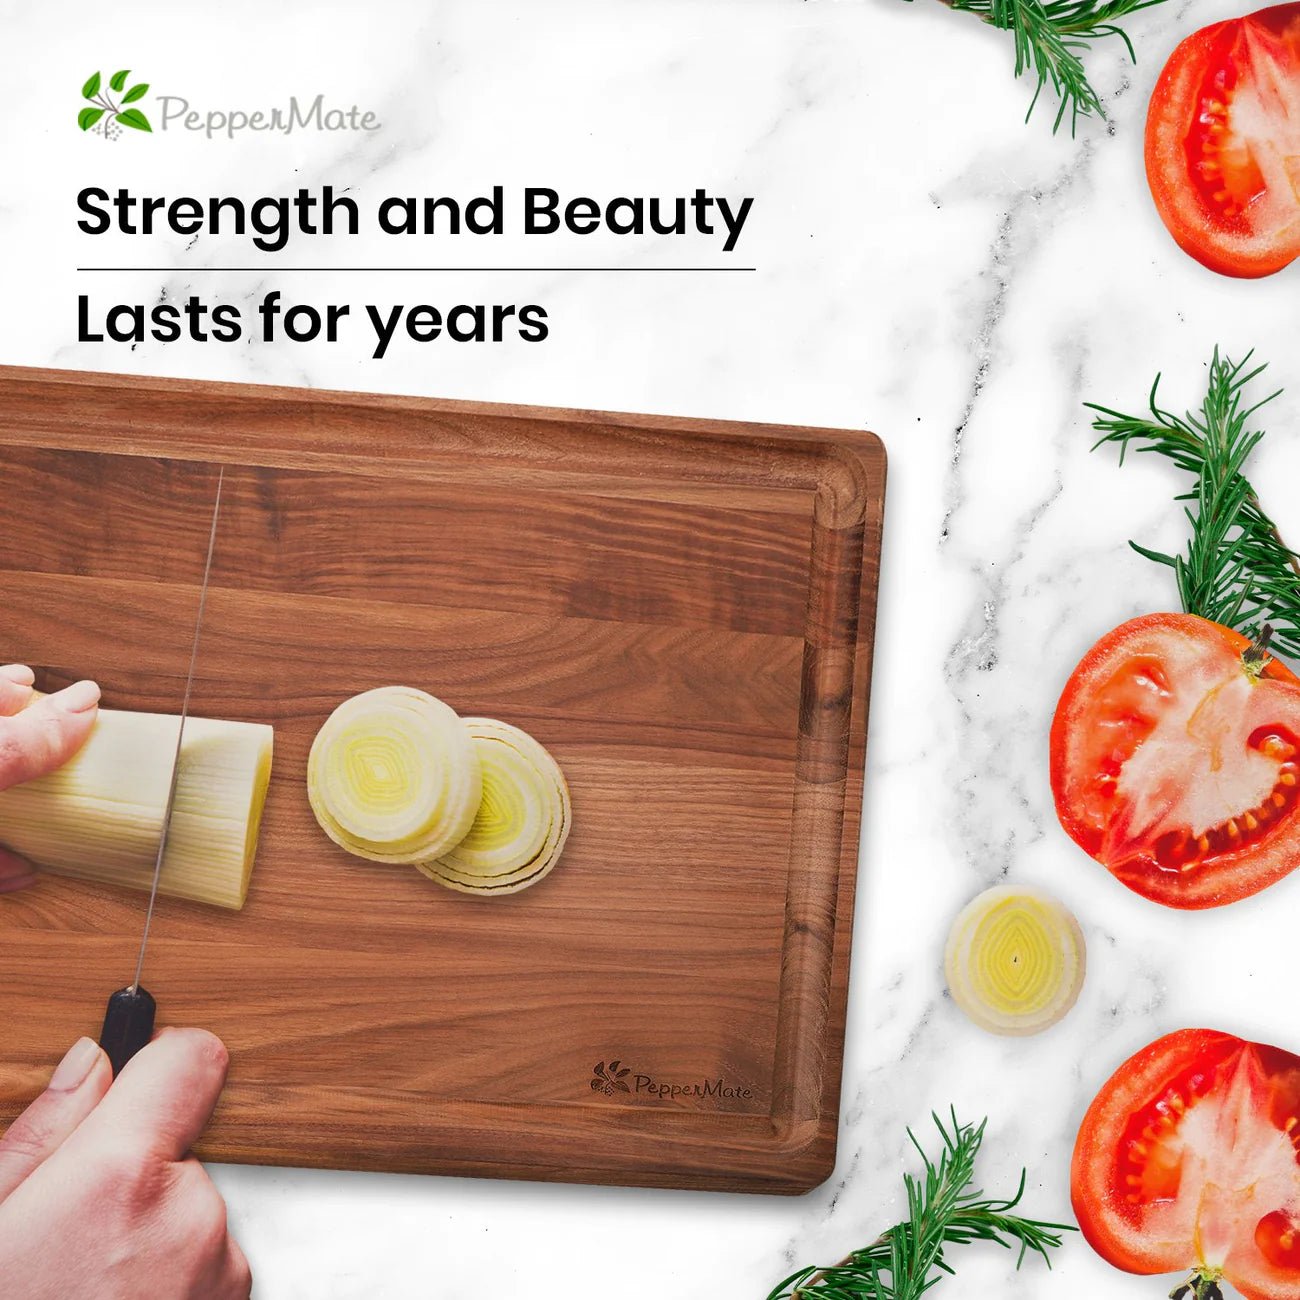 The Cutting Edge Choice: Why Real Hardwood Cutting Boards Trump the Rest - PepperMate.com | The Home of the World Famous and Best Pepper Mills and Grinders | Fresh Pepper Every Time